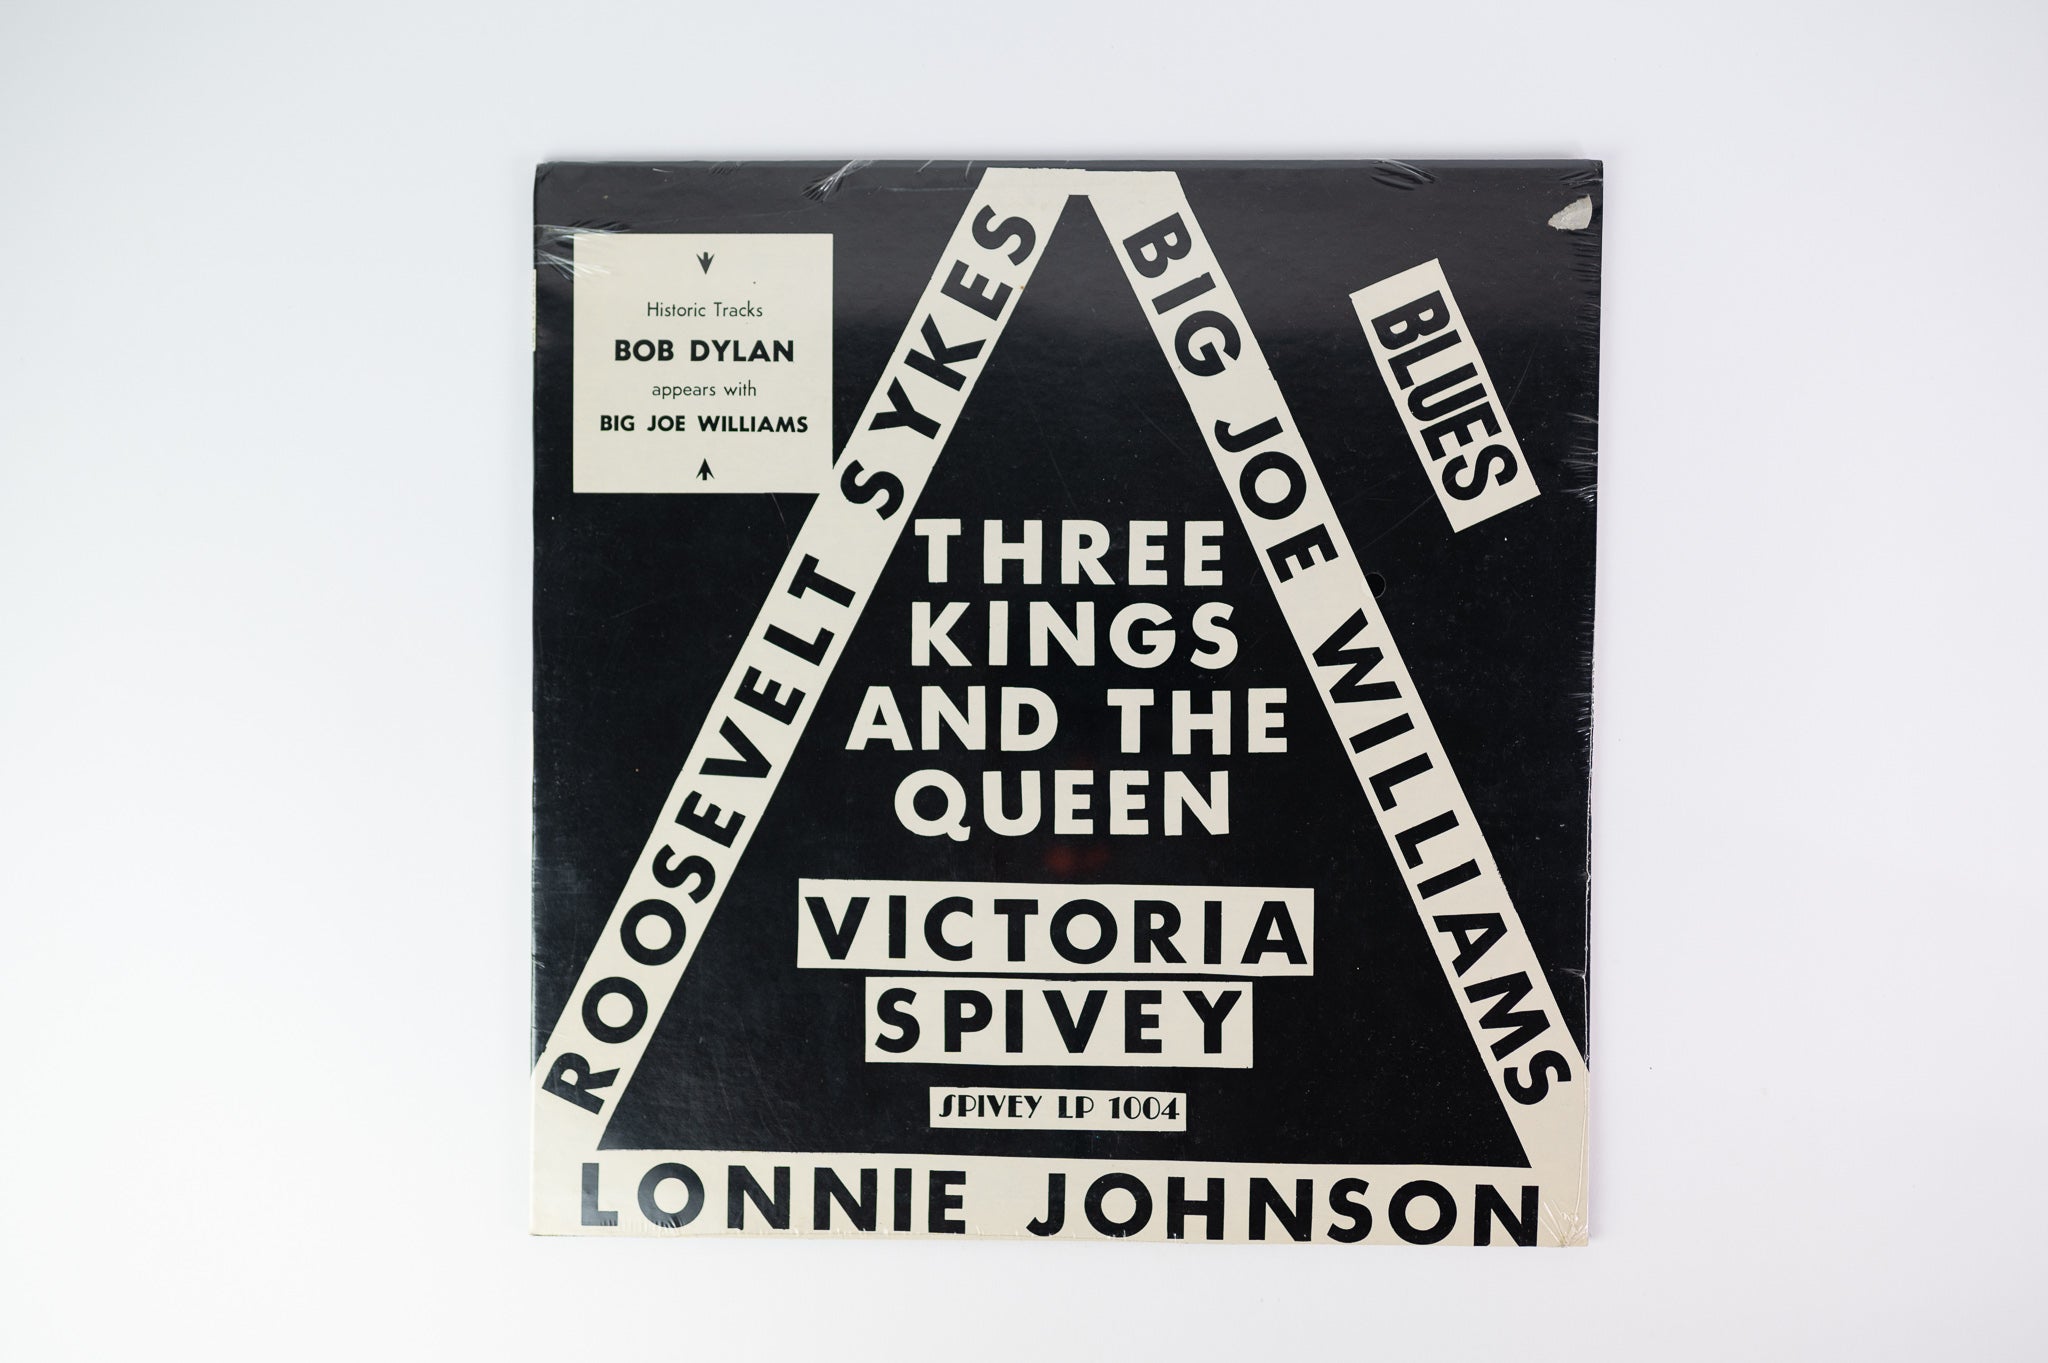 Roosevelt Sykes, Big Joe Williams, Lonnie Johnson, Victoria Spivey - Three Kings And The Queen on Spivey